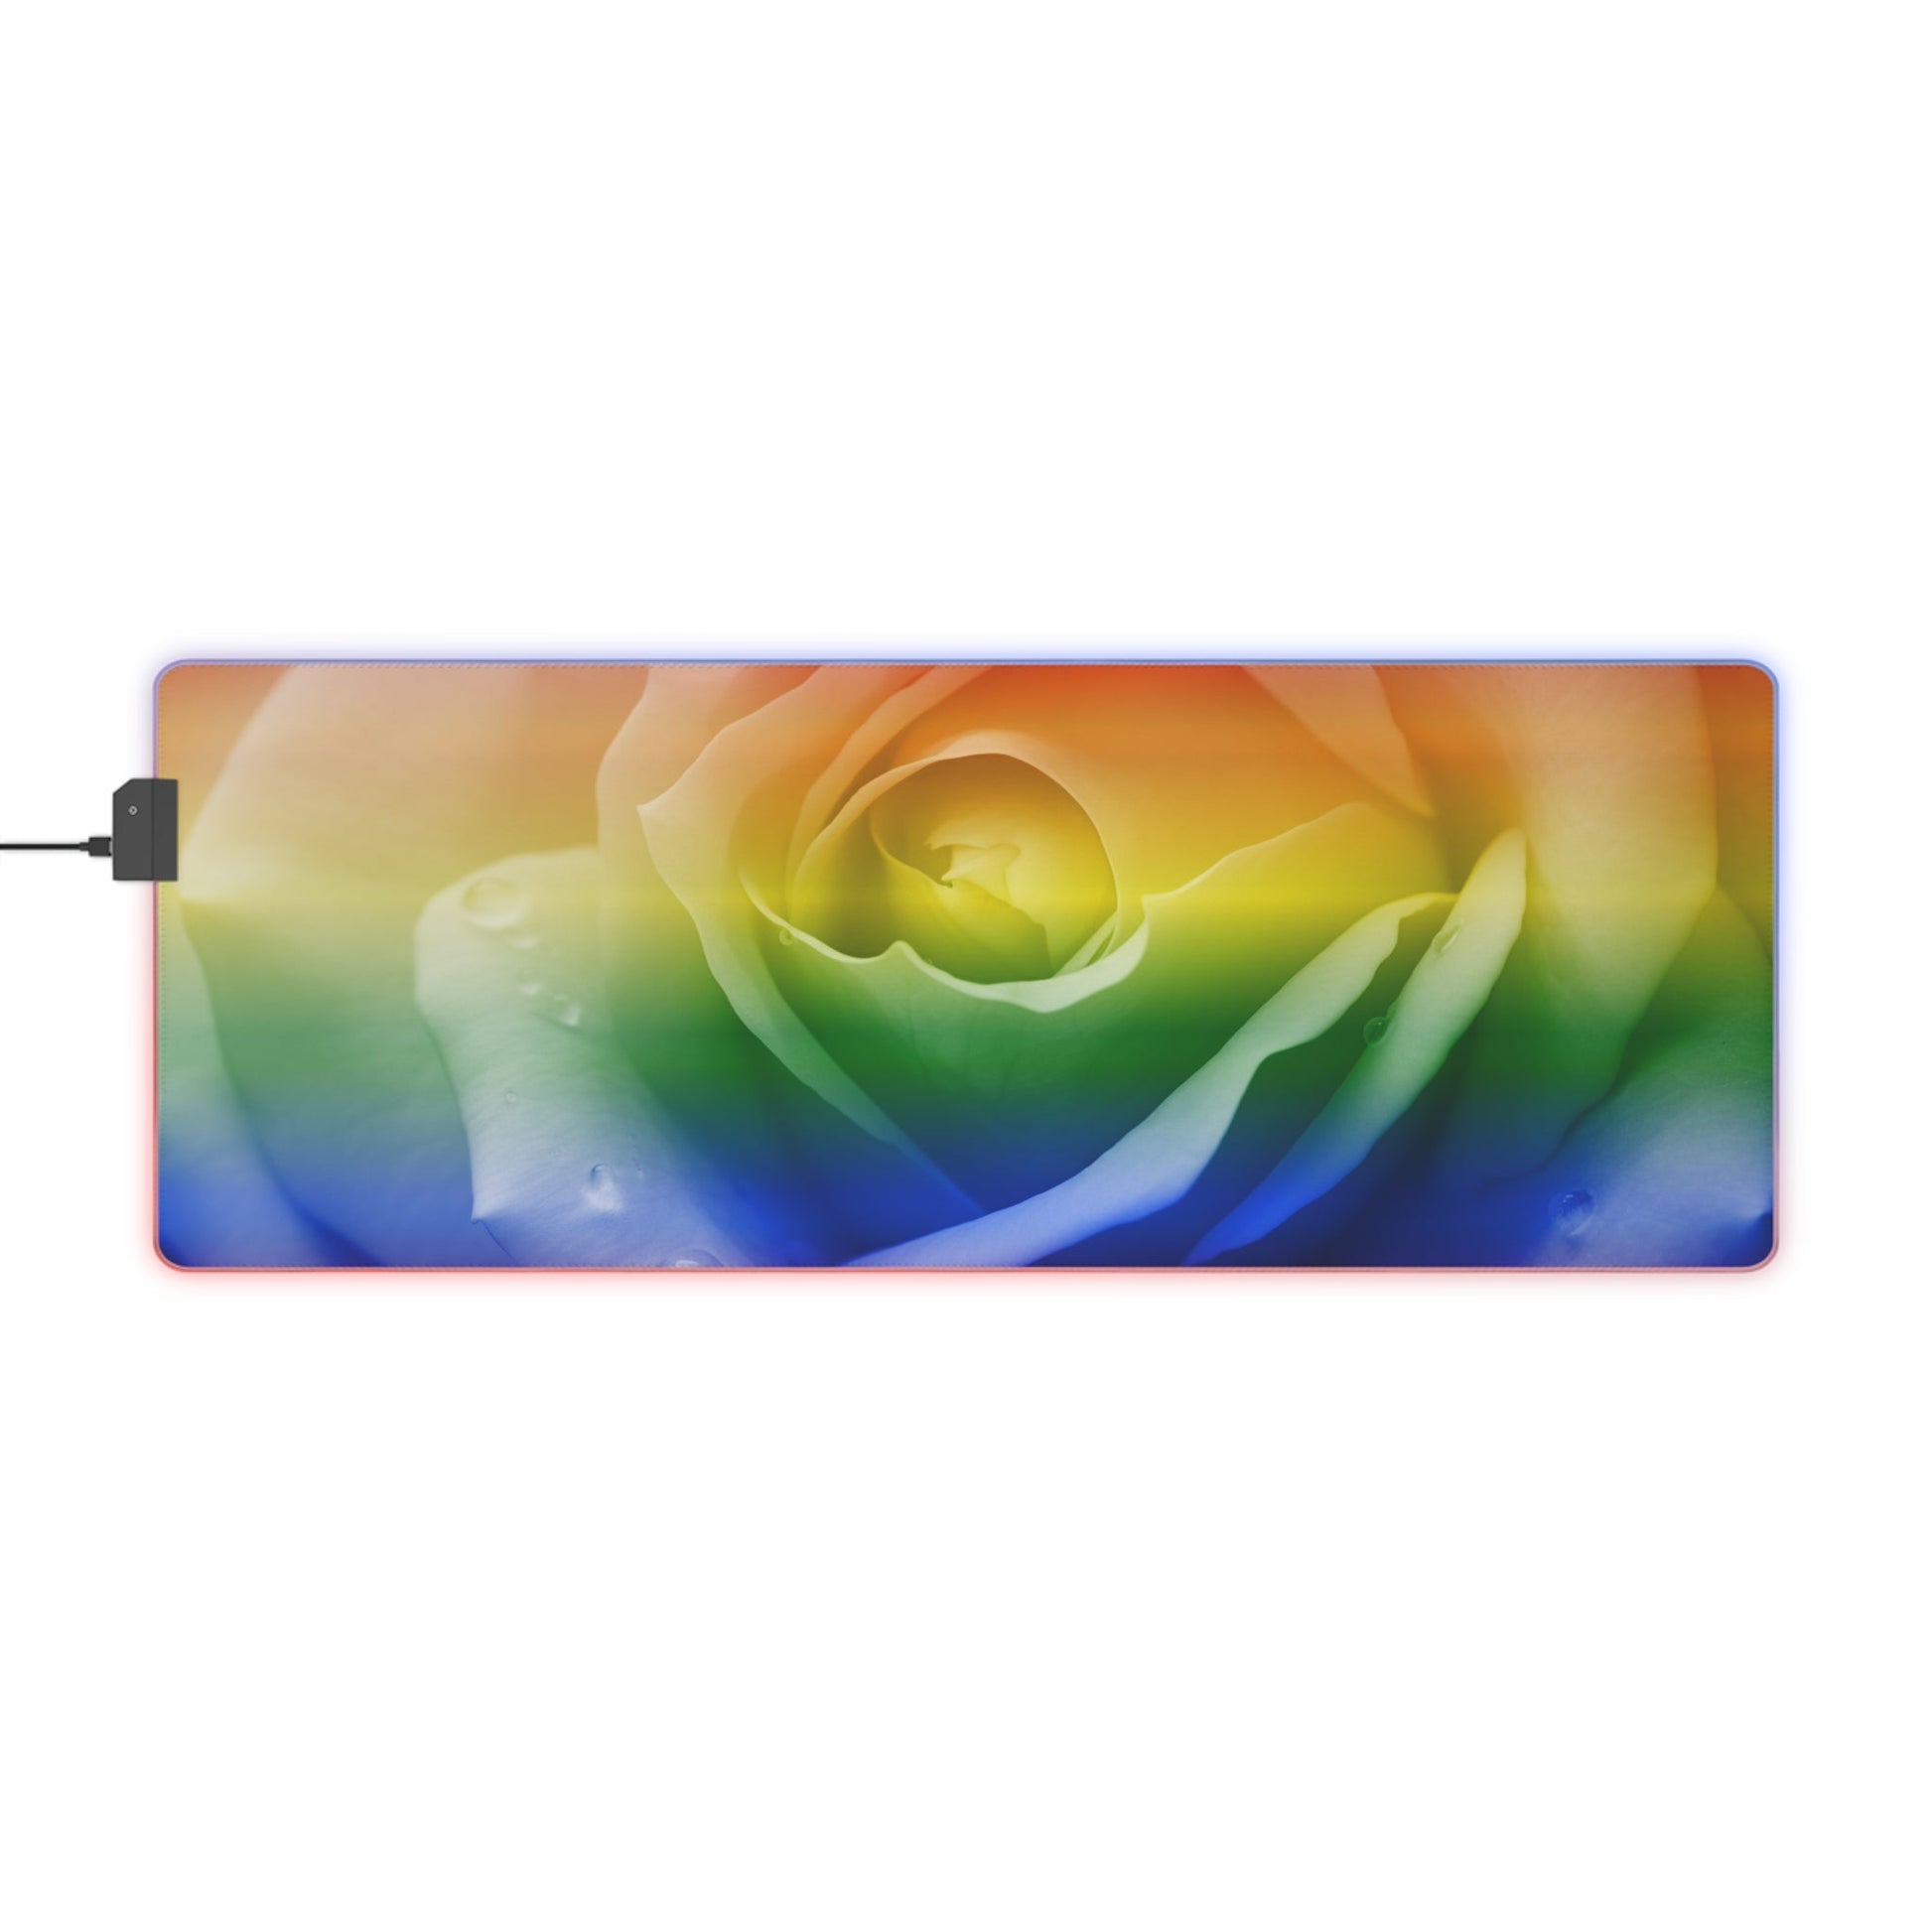 31.5 x 11.8 / Rectangle 22 Proud Rose LED Gaming Mouse Pad